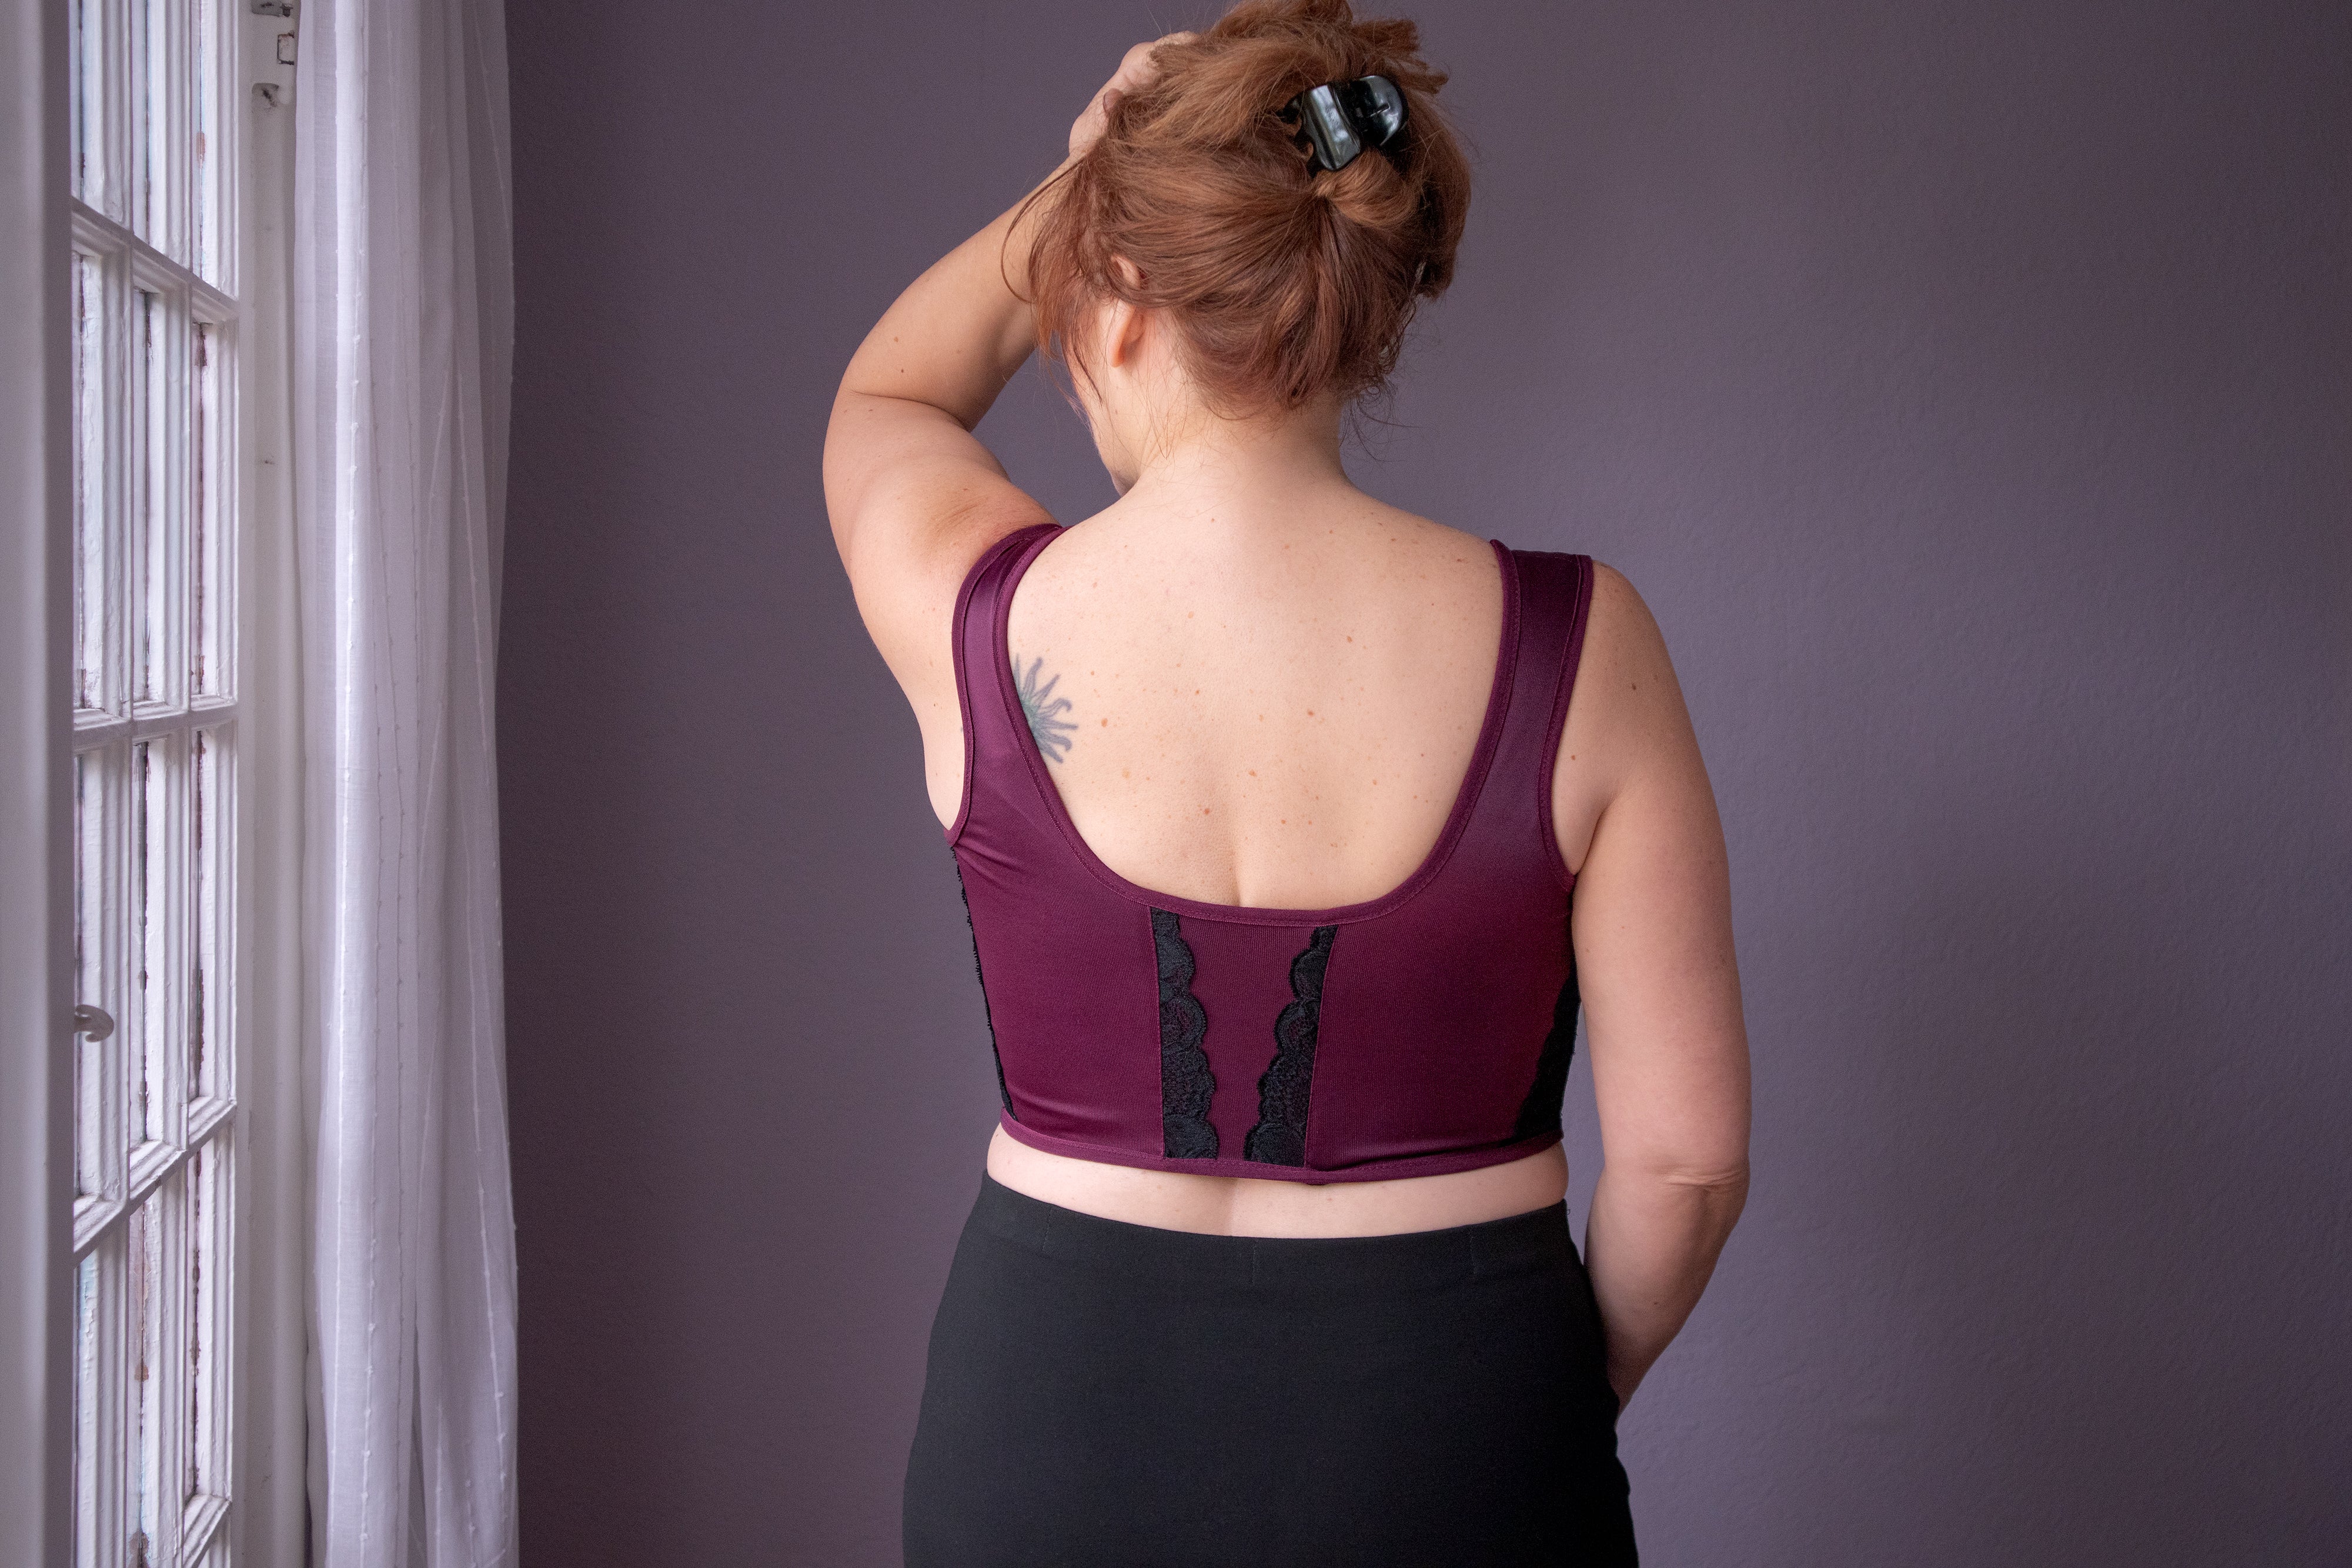 Odessa Holiday Top by Rubies Bras. Braless Bra Top for Going Out. Corset Bustier Shape That's Supportive, Comfortable and Shapewear with Boning. Front Closure Easy to Wear with Wide Straps With Foam. Wirefree With Flexible Boning To Lift Breasts.